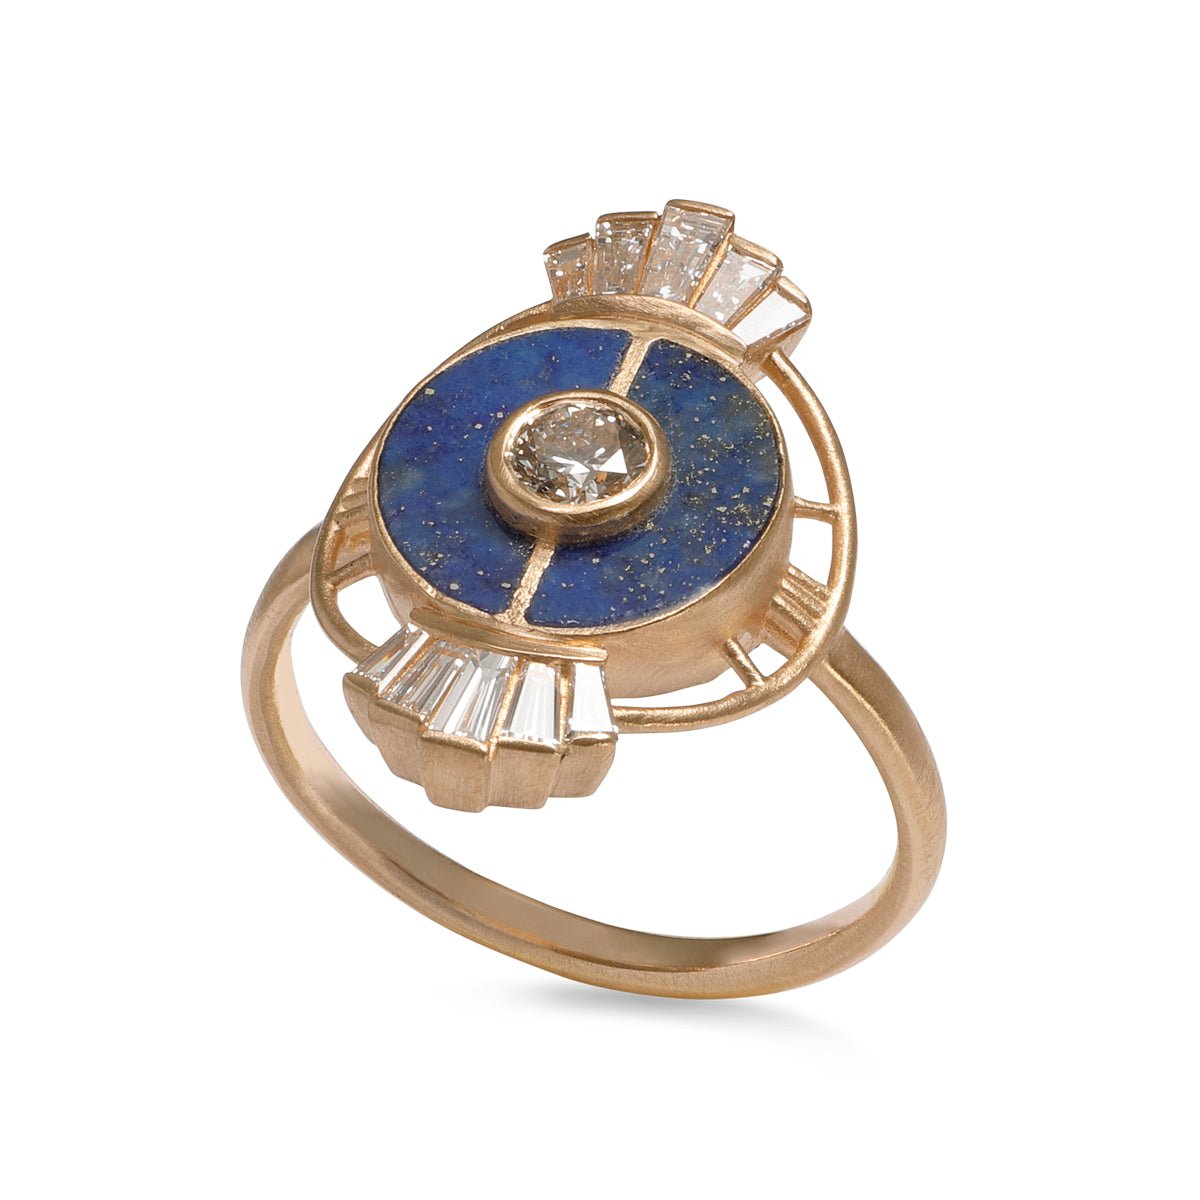 Ara 14K recycled gold ring, with lab-grown diamonds and chilean lapis inlay. Designed and handcrafted in Portland, Oregon.